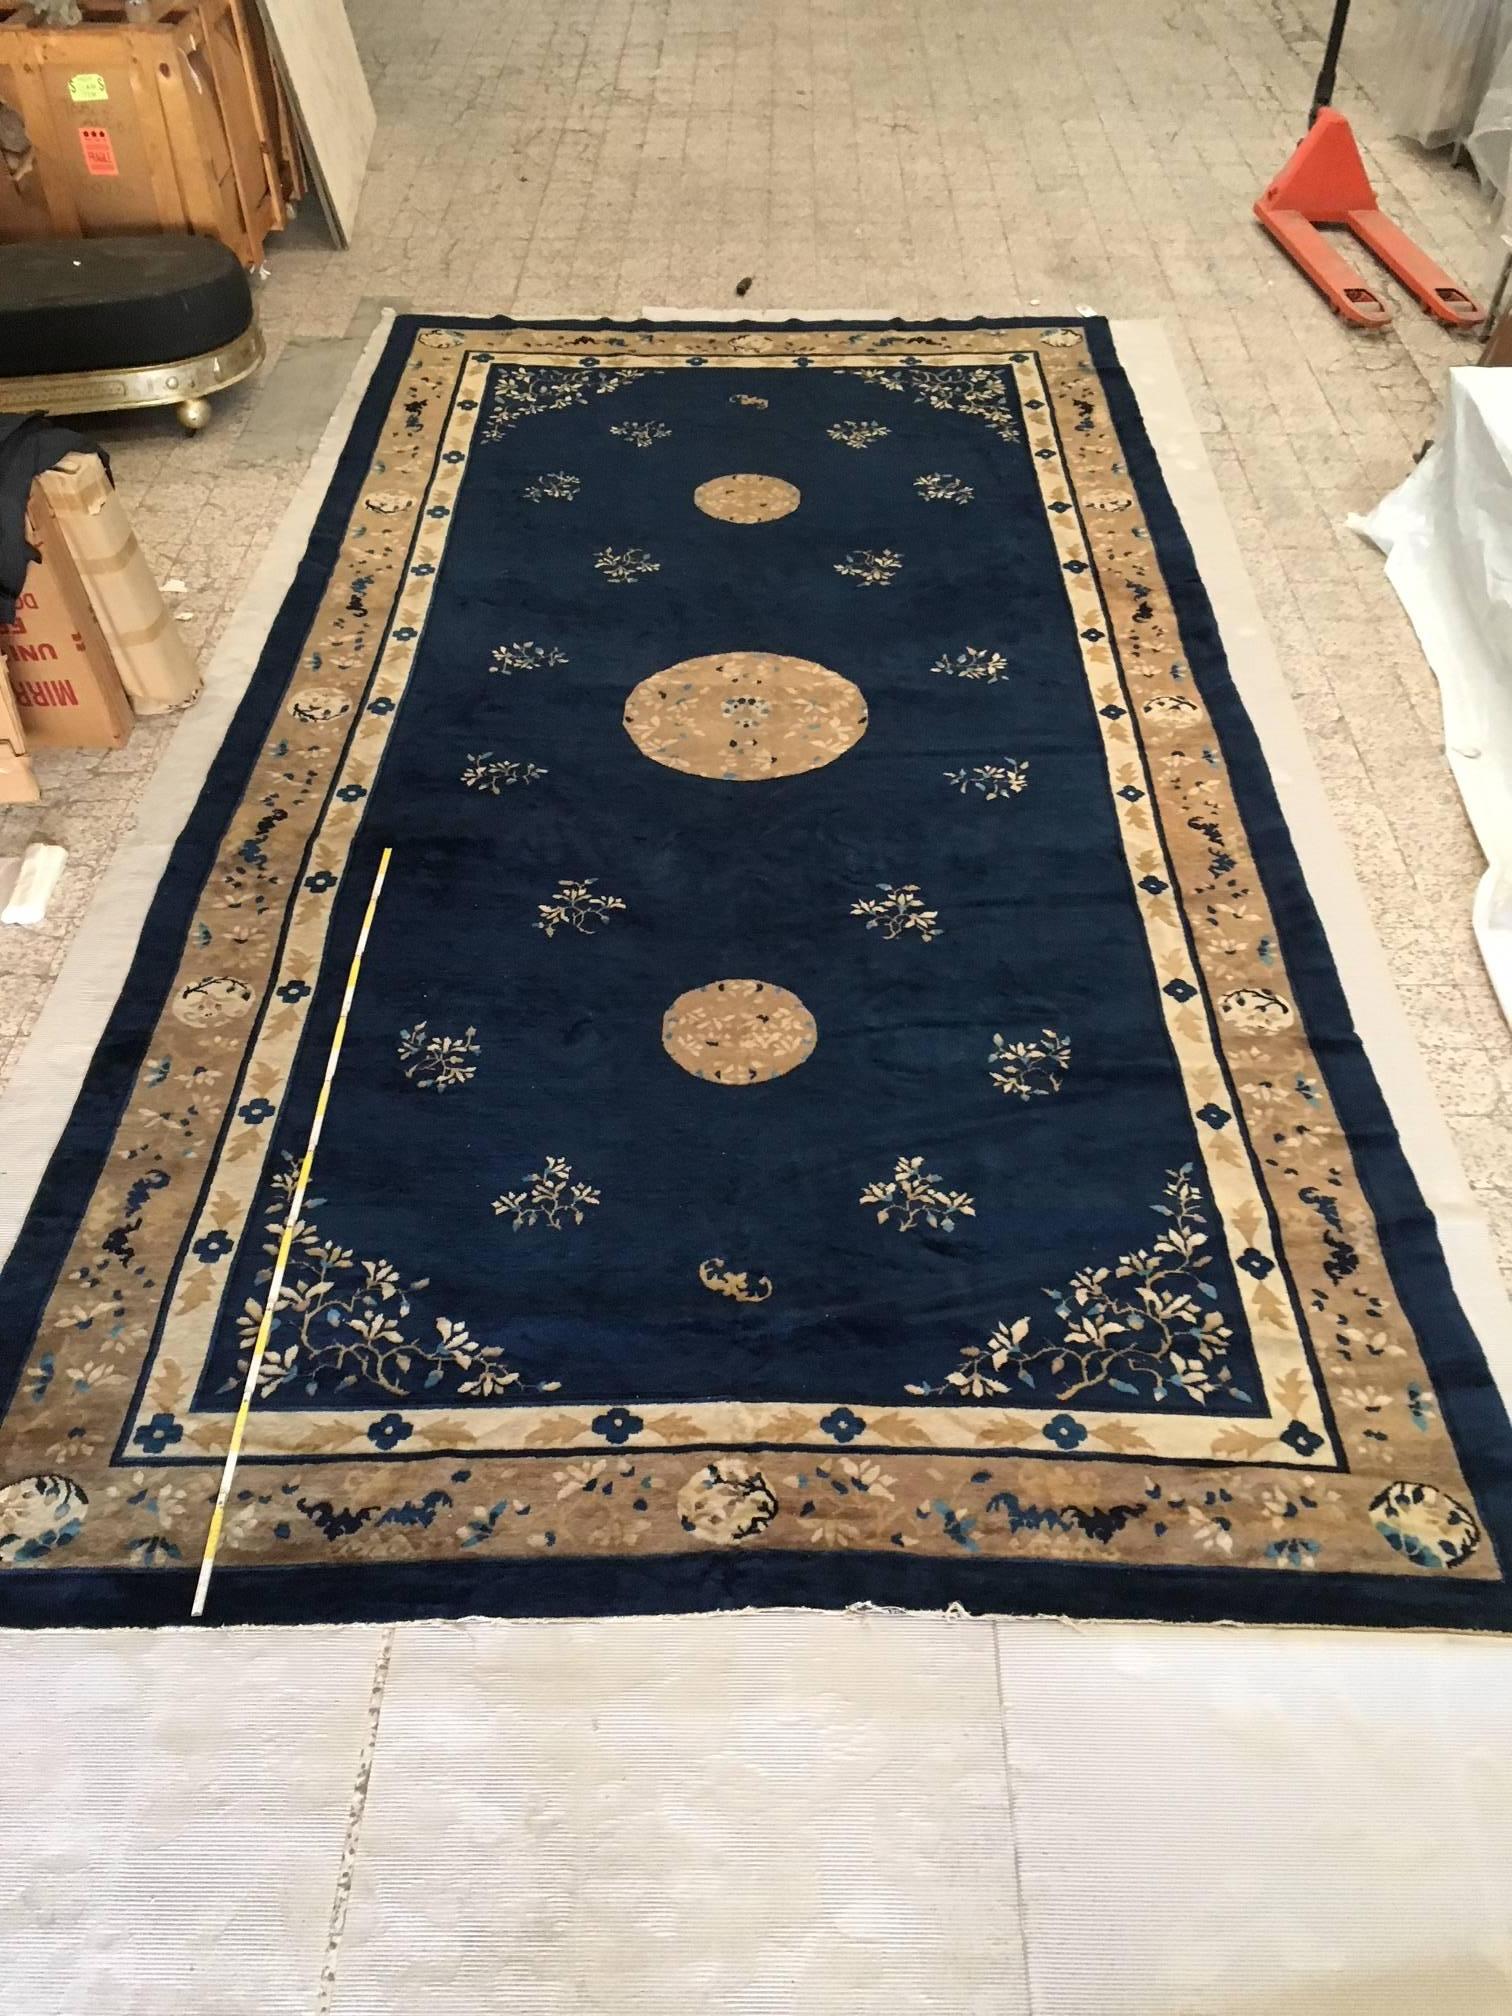 This massive, antique Peking rug features a complex yet traditional yet modern design that spreads across this composition. A simplistic design unfolds with elegance of this early 20th century Chinese Peking rug. From the all-over floral pattern to